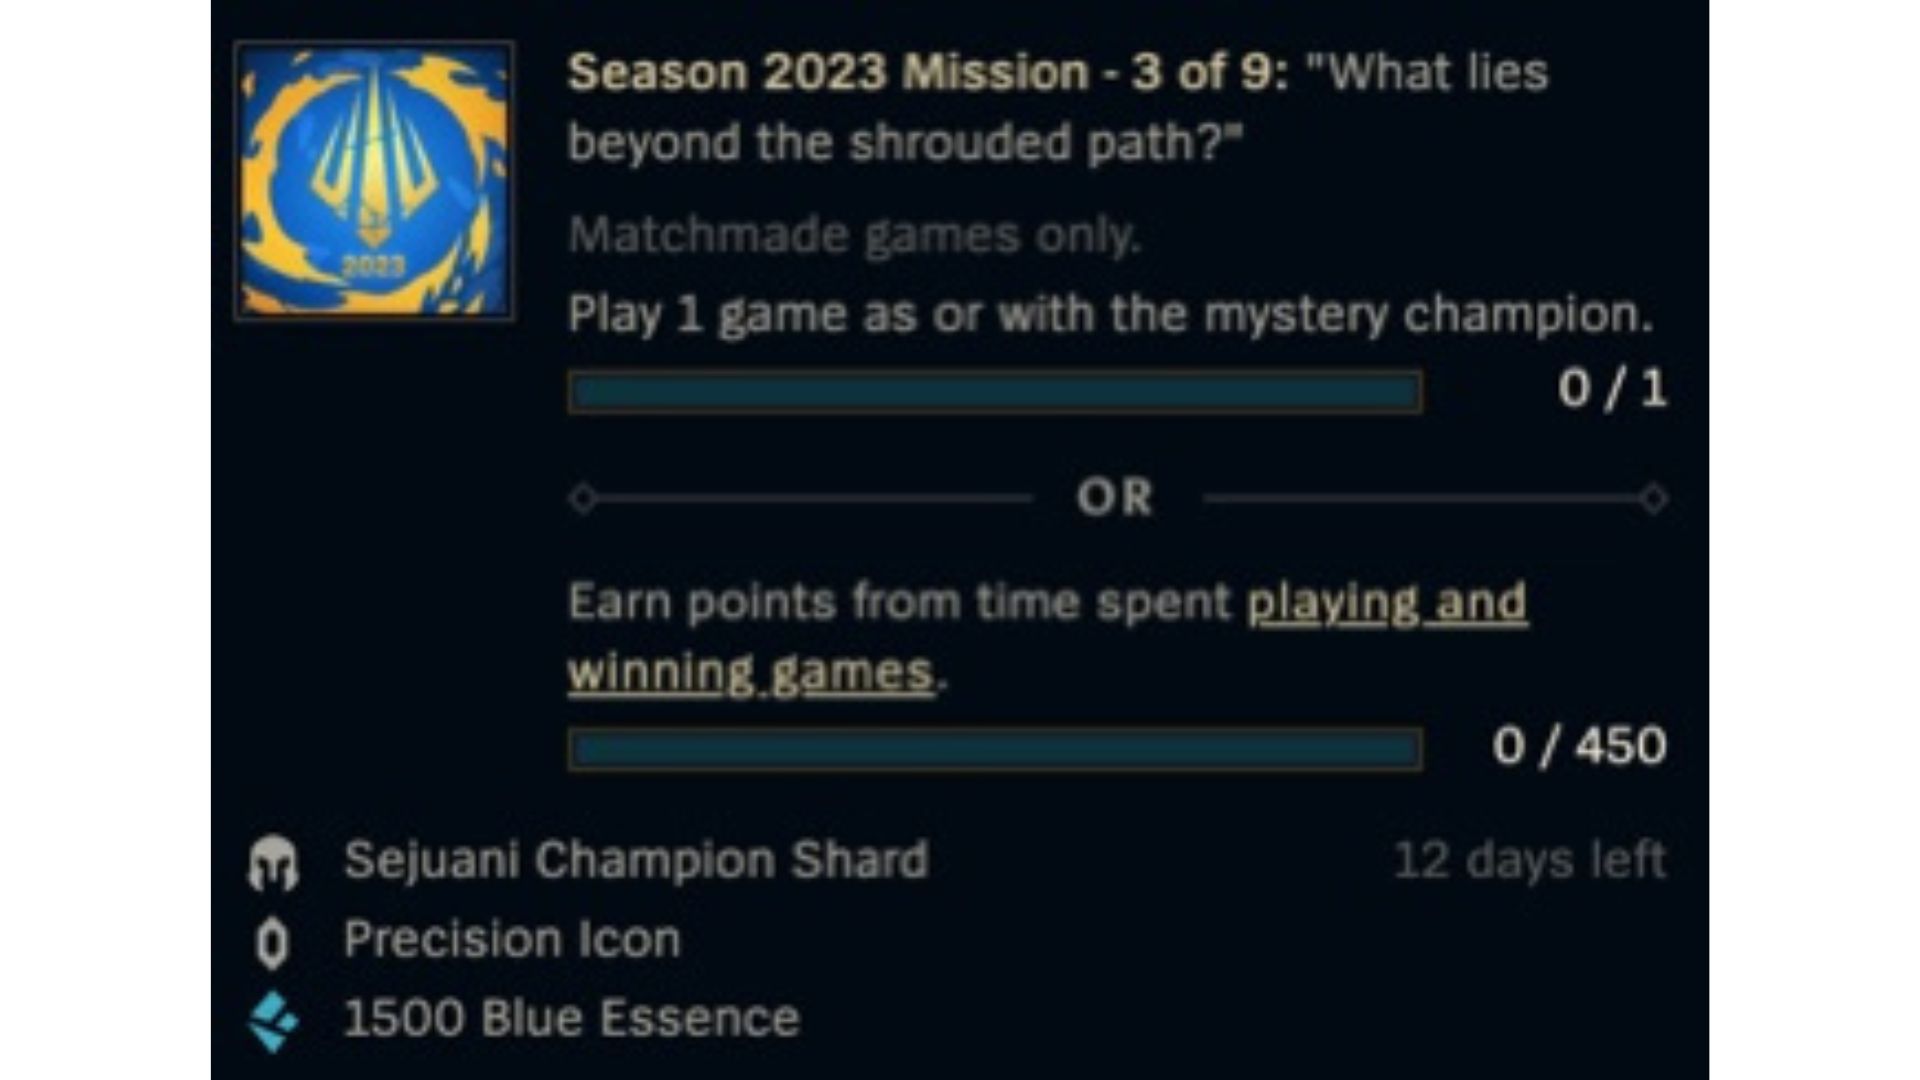 Who are The Mystery Champions in League’s Season 2023 Missions